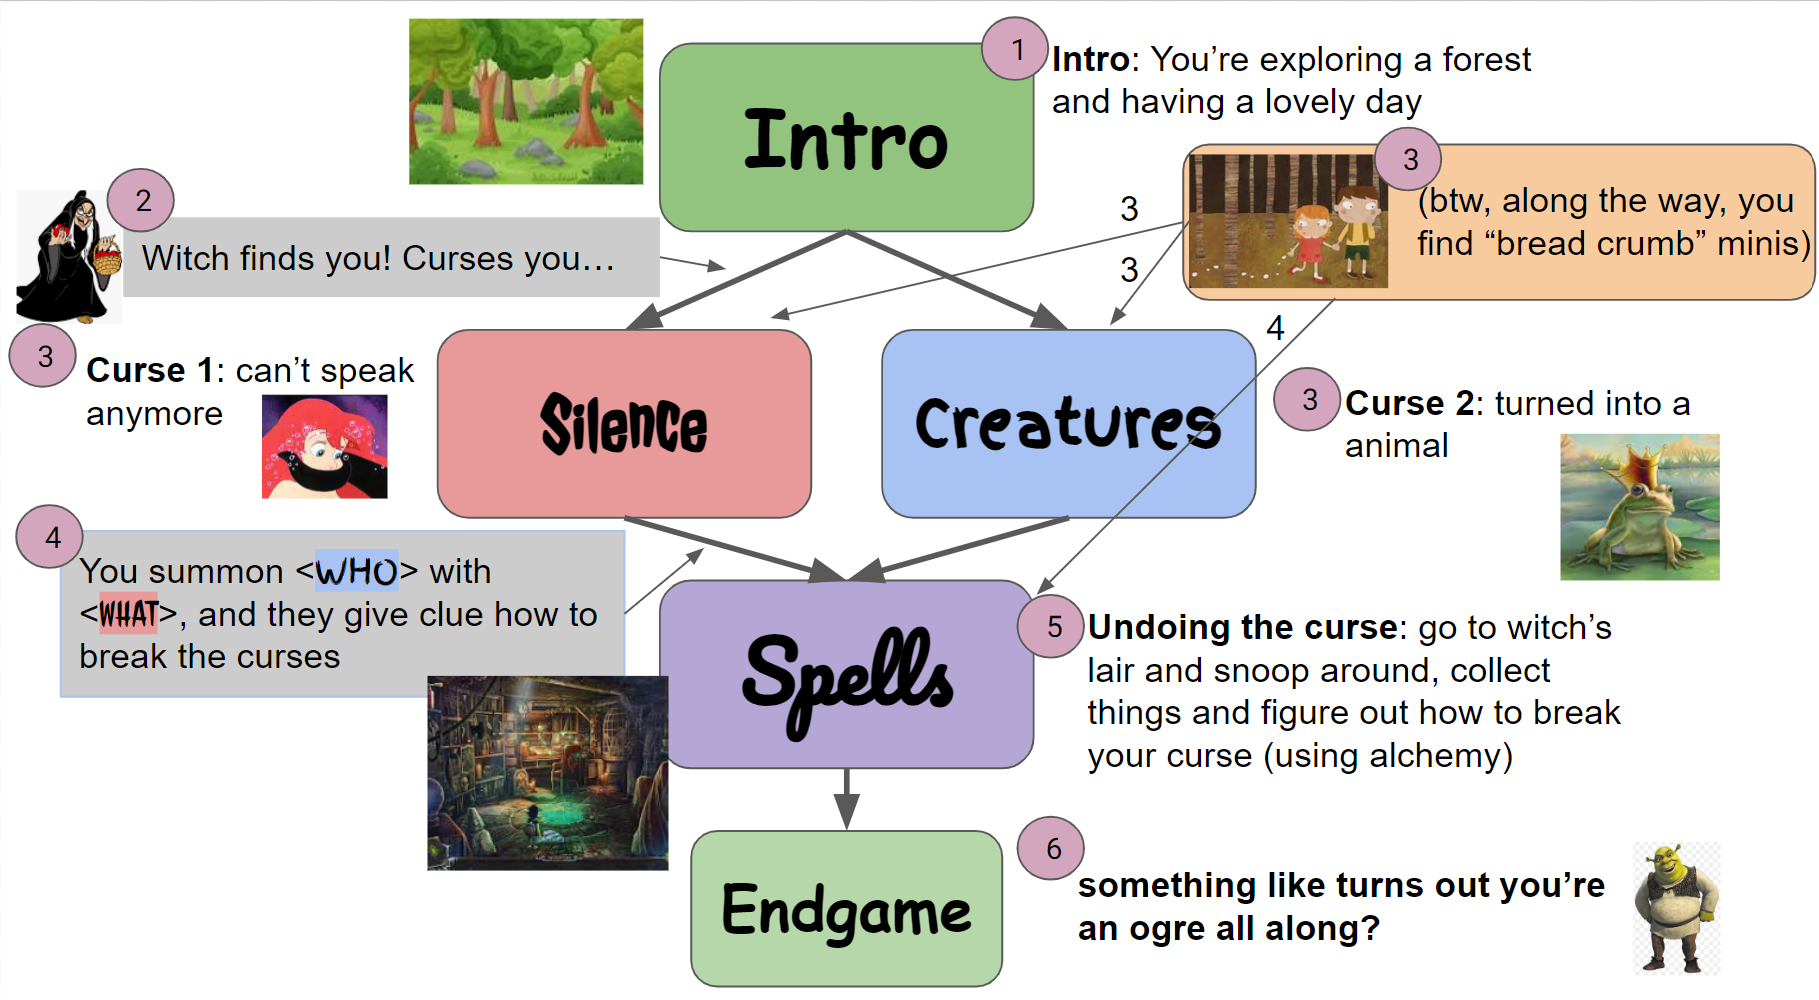 Storyboard showing the flow starting with Intro, leading to Silence and Creatures, followed by Spells (Witch's Hut) and lastly the Endgame.